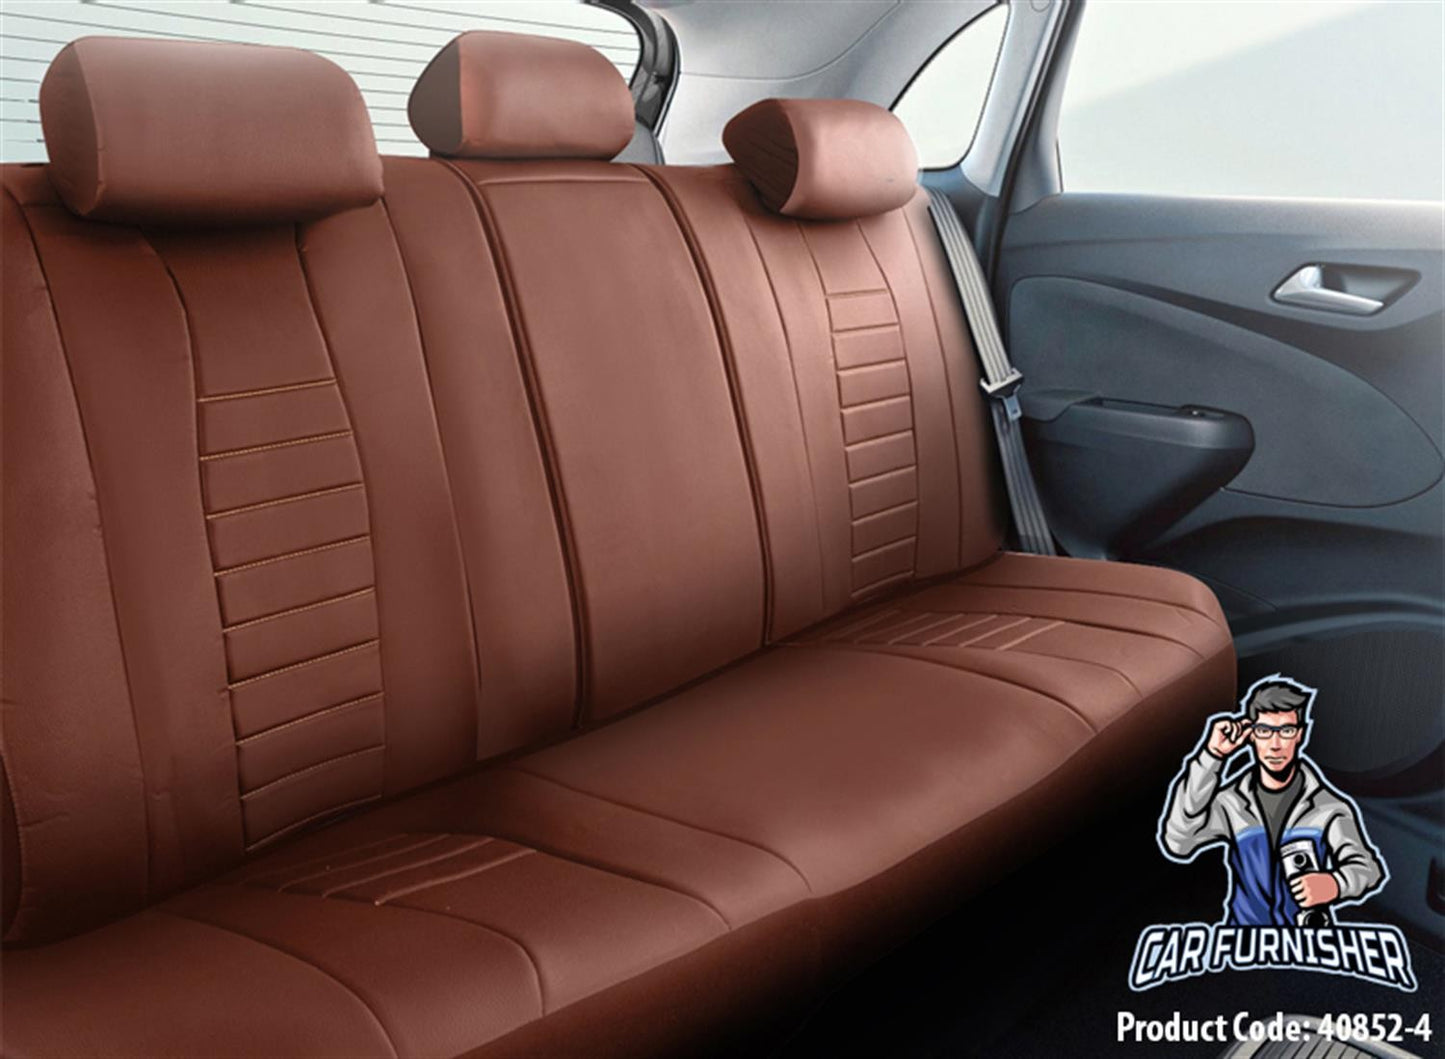 Luxury Car Seat Cover Set (5 Colors) | Tokyo Series Tan-Snuff Full Leather